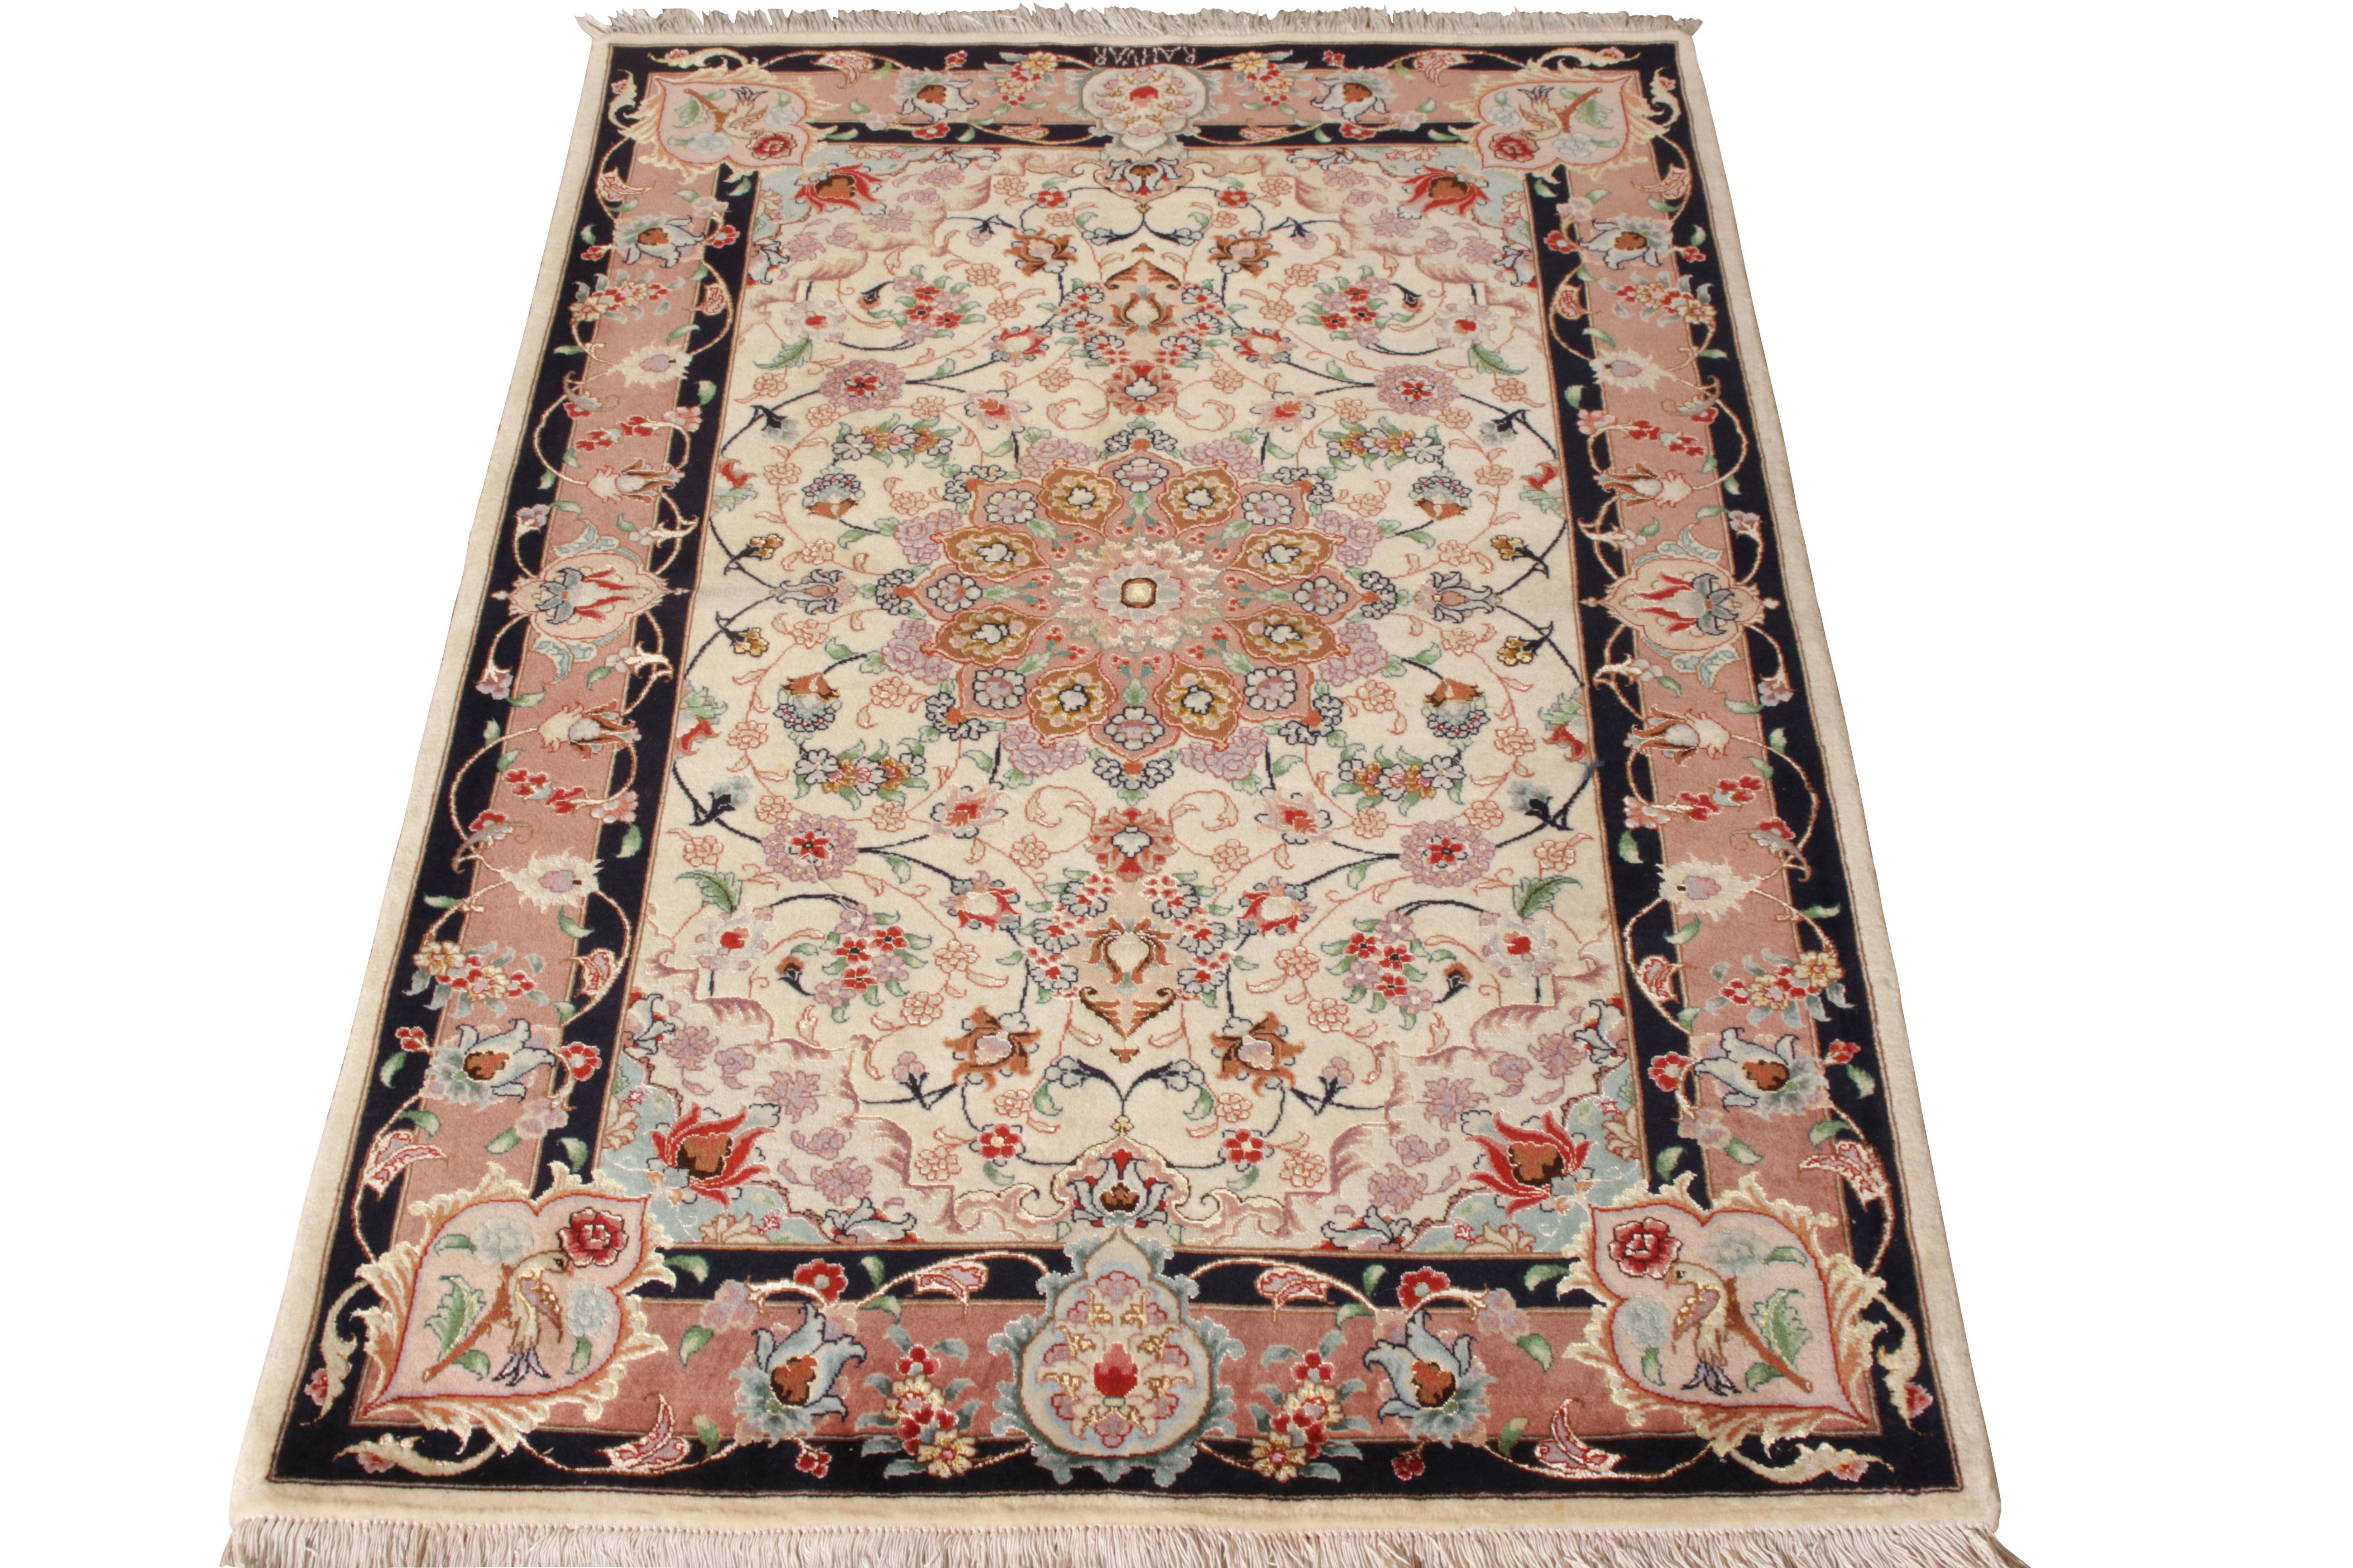 A hand knotted silk 3x5 rug joining distinguished mid-century Persian selections in Rug & Kilim’s Antique & Vintage collection. Originating circa 1950-1960, this particular Tabriz rug features a unique colorway that accents graciously in a beige,